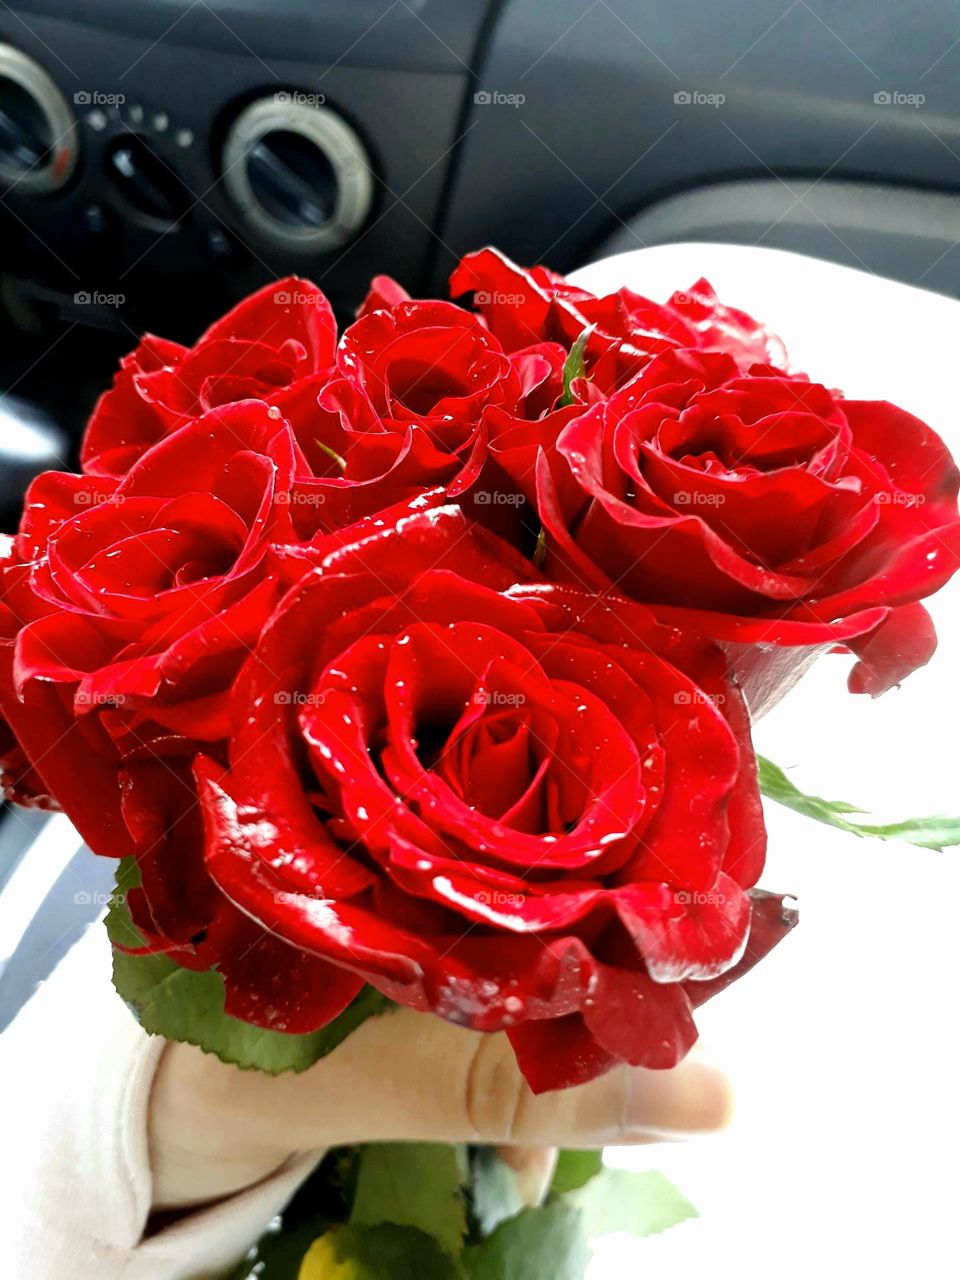 nothing can beat the power of a unique red rose .. ❤